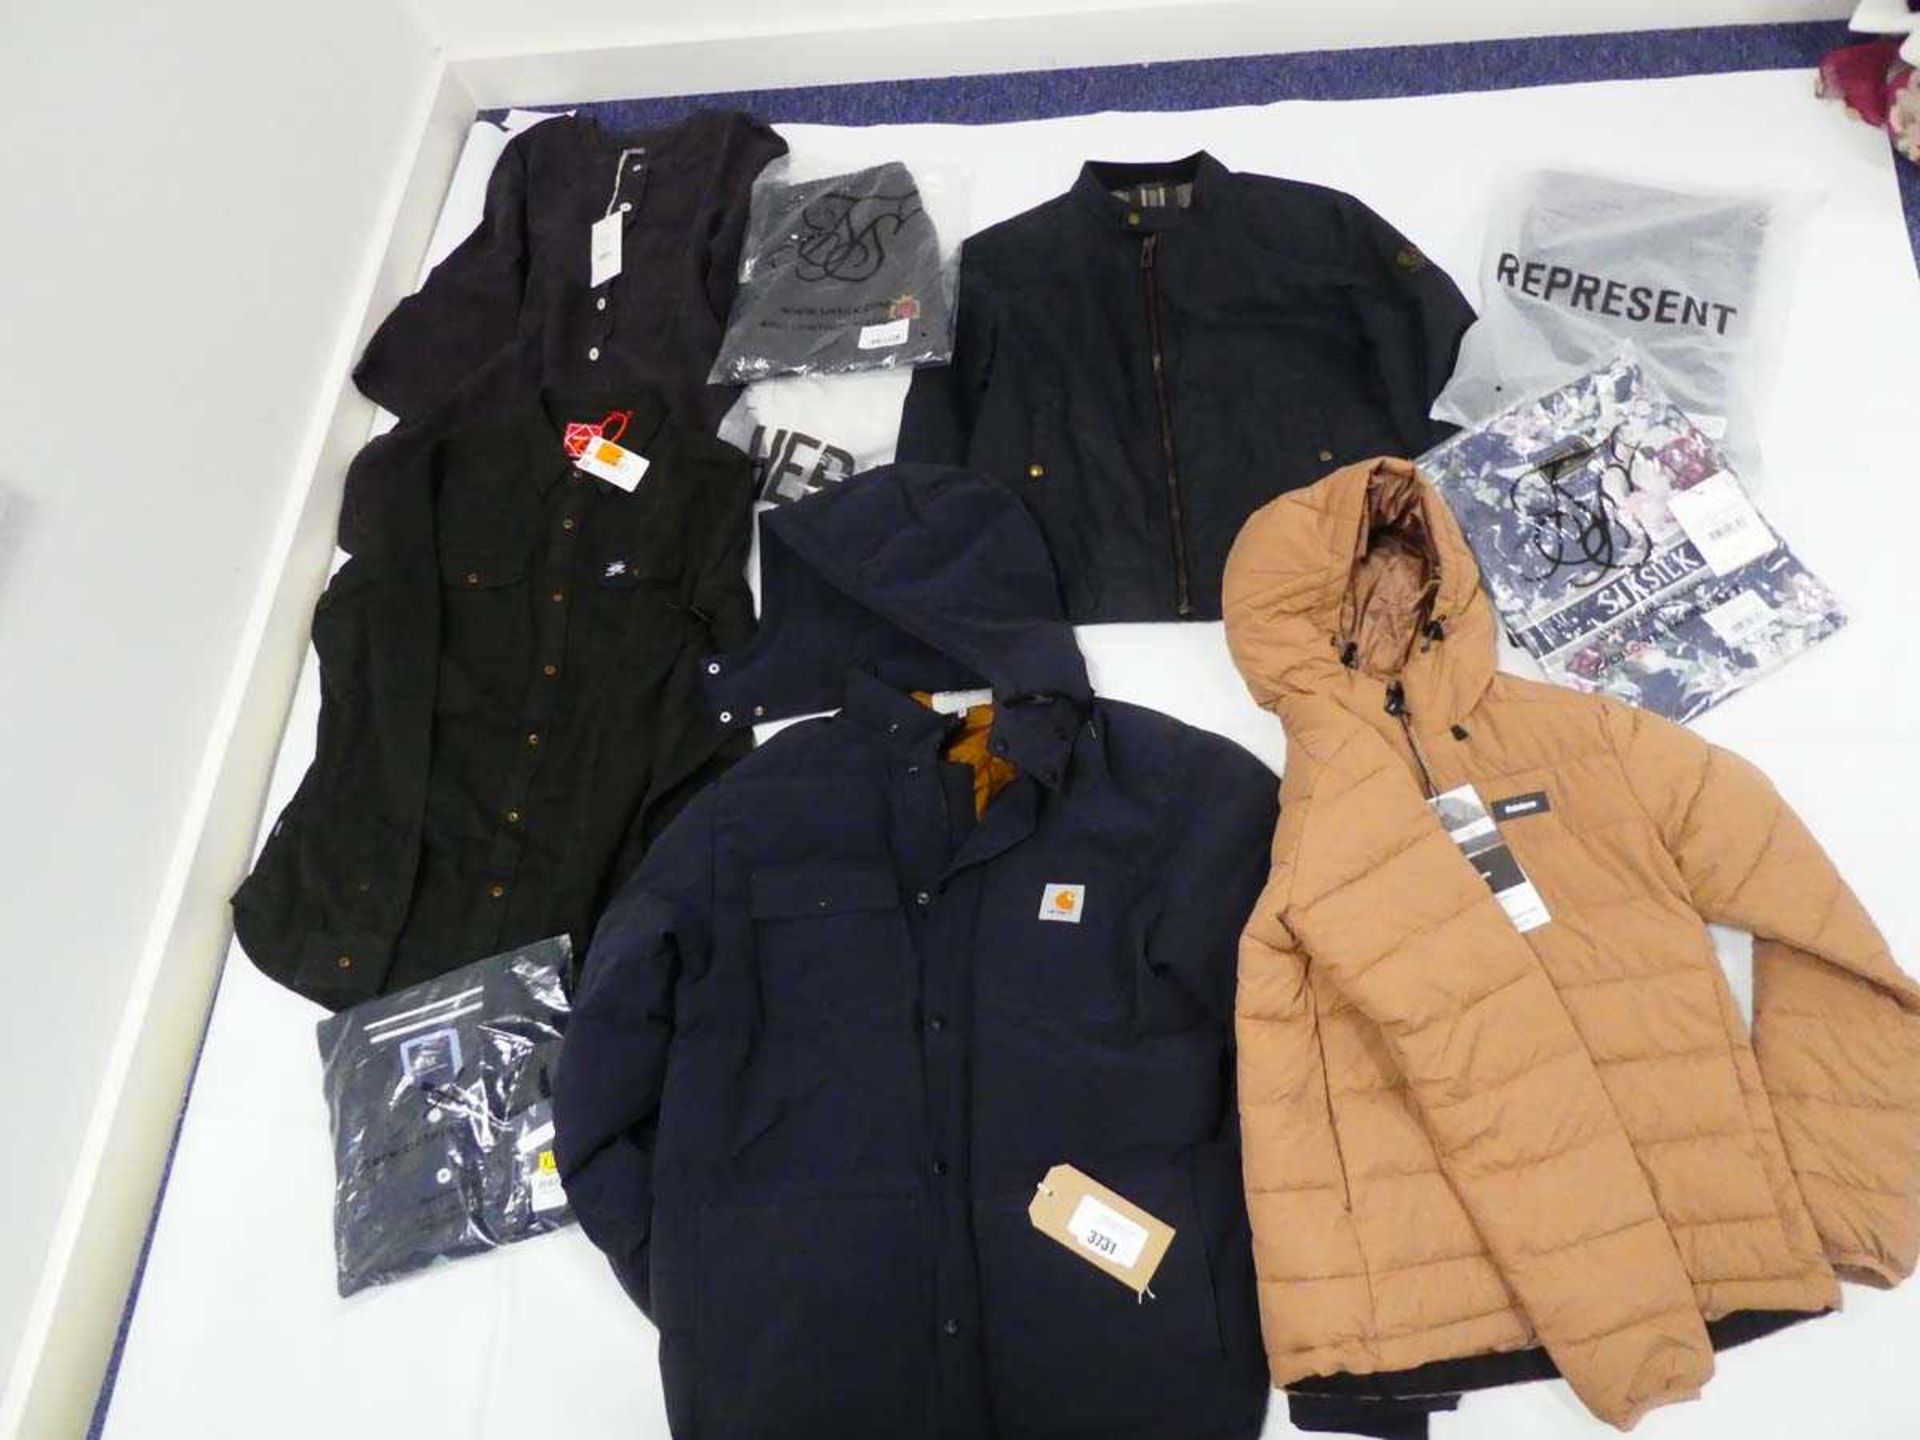 +VAT Selection of clothing to include Belstaff, Carhartt, Finisterre, etc